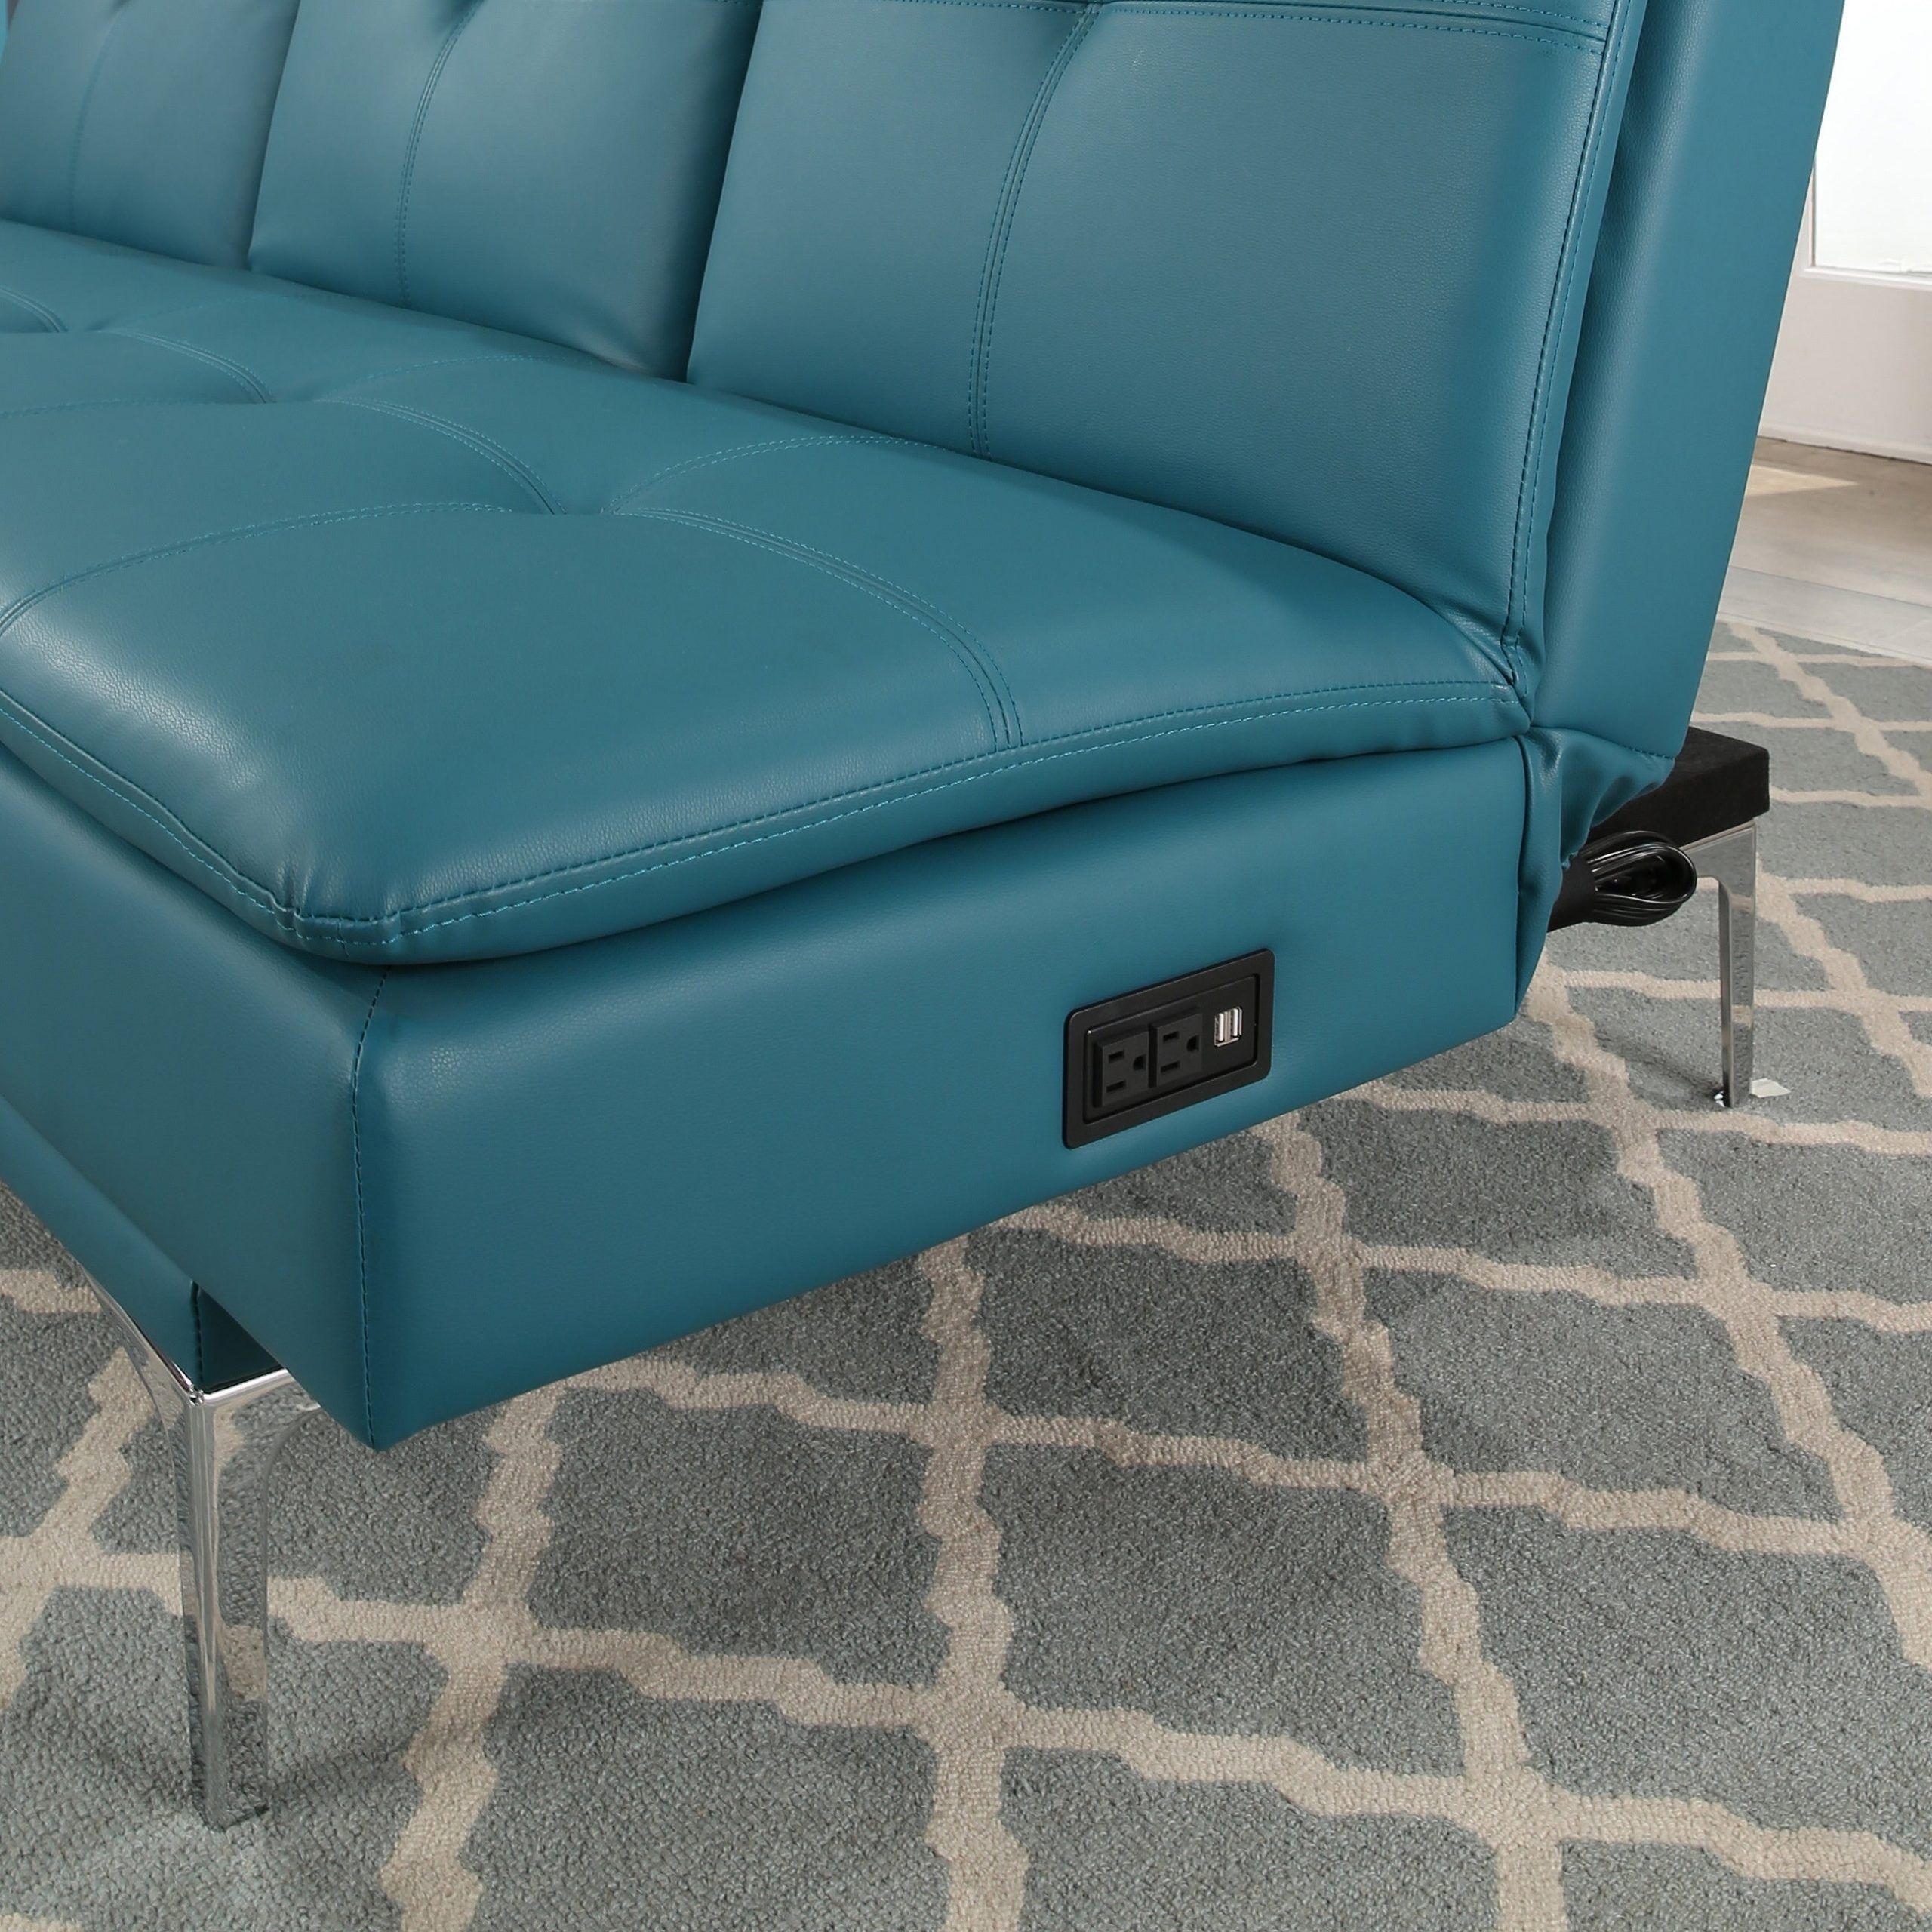 Abbyson Kilby Turquoise Bonded Leather Sofa Bed With Console And Usb Inside Espresso Faux Leather Ac And Usb Ottomans (View 4 of 20)